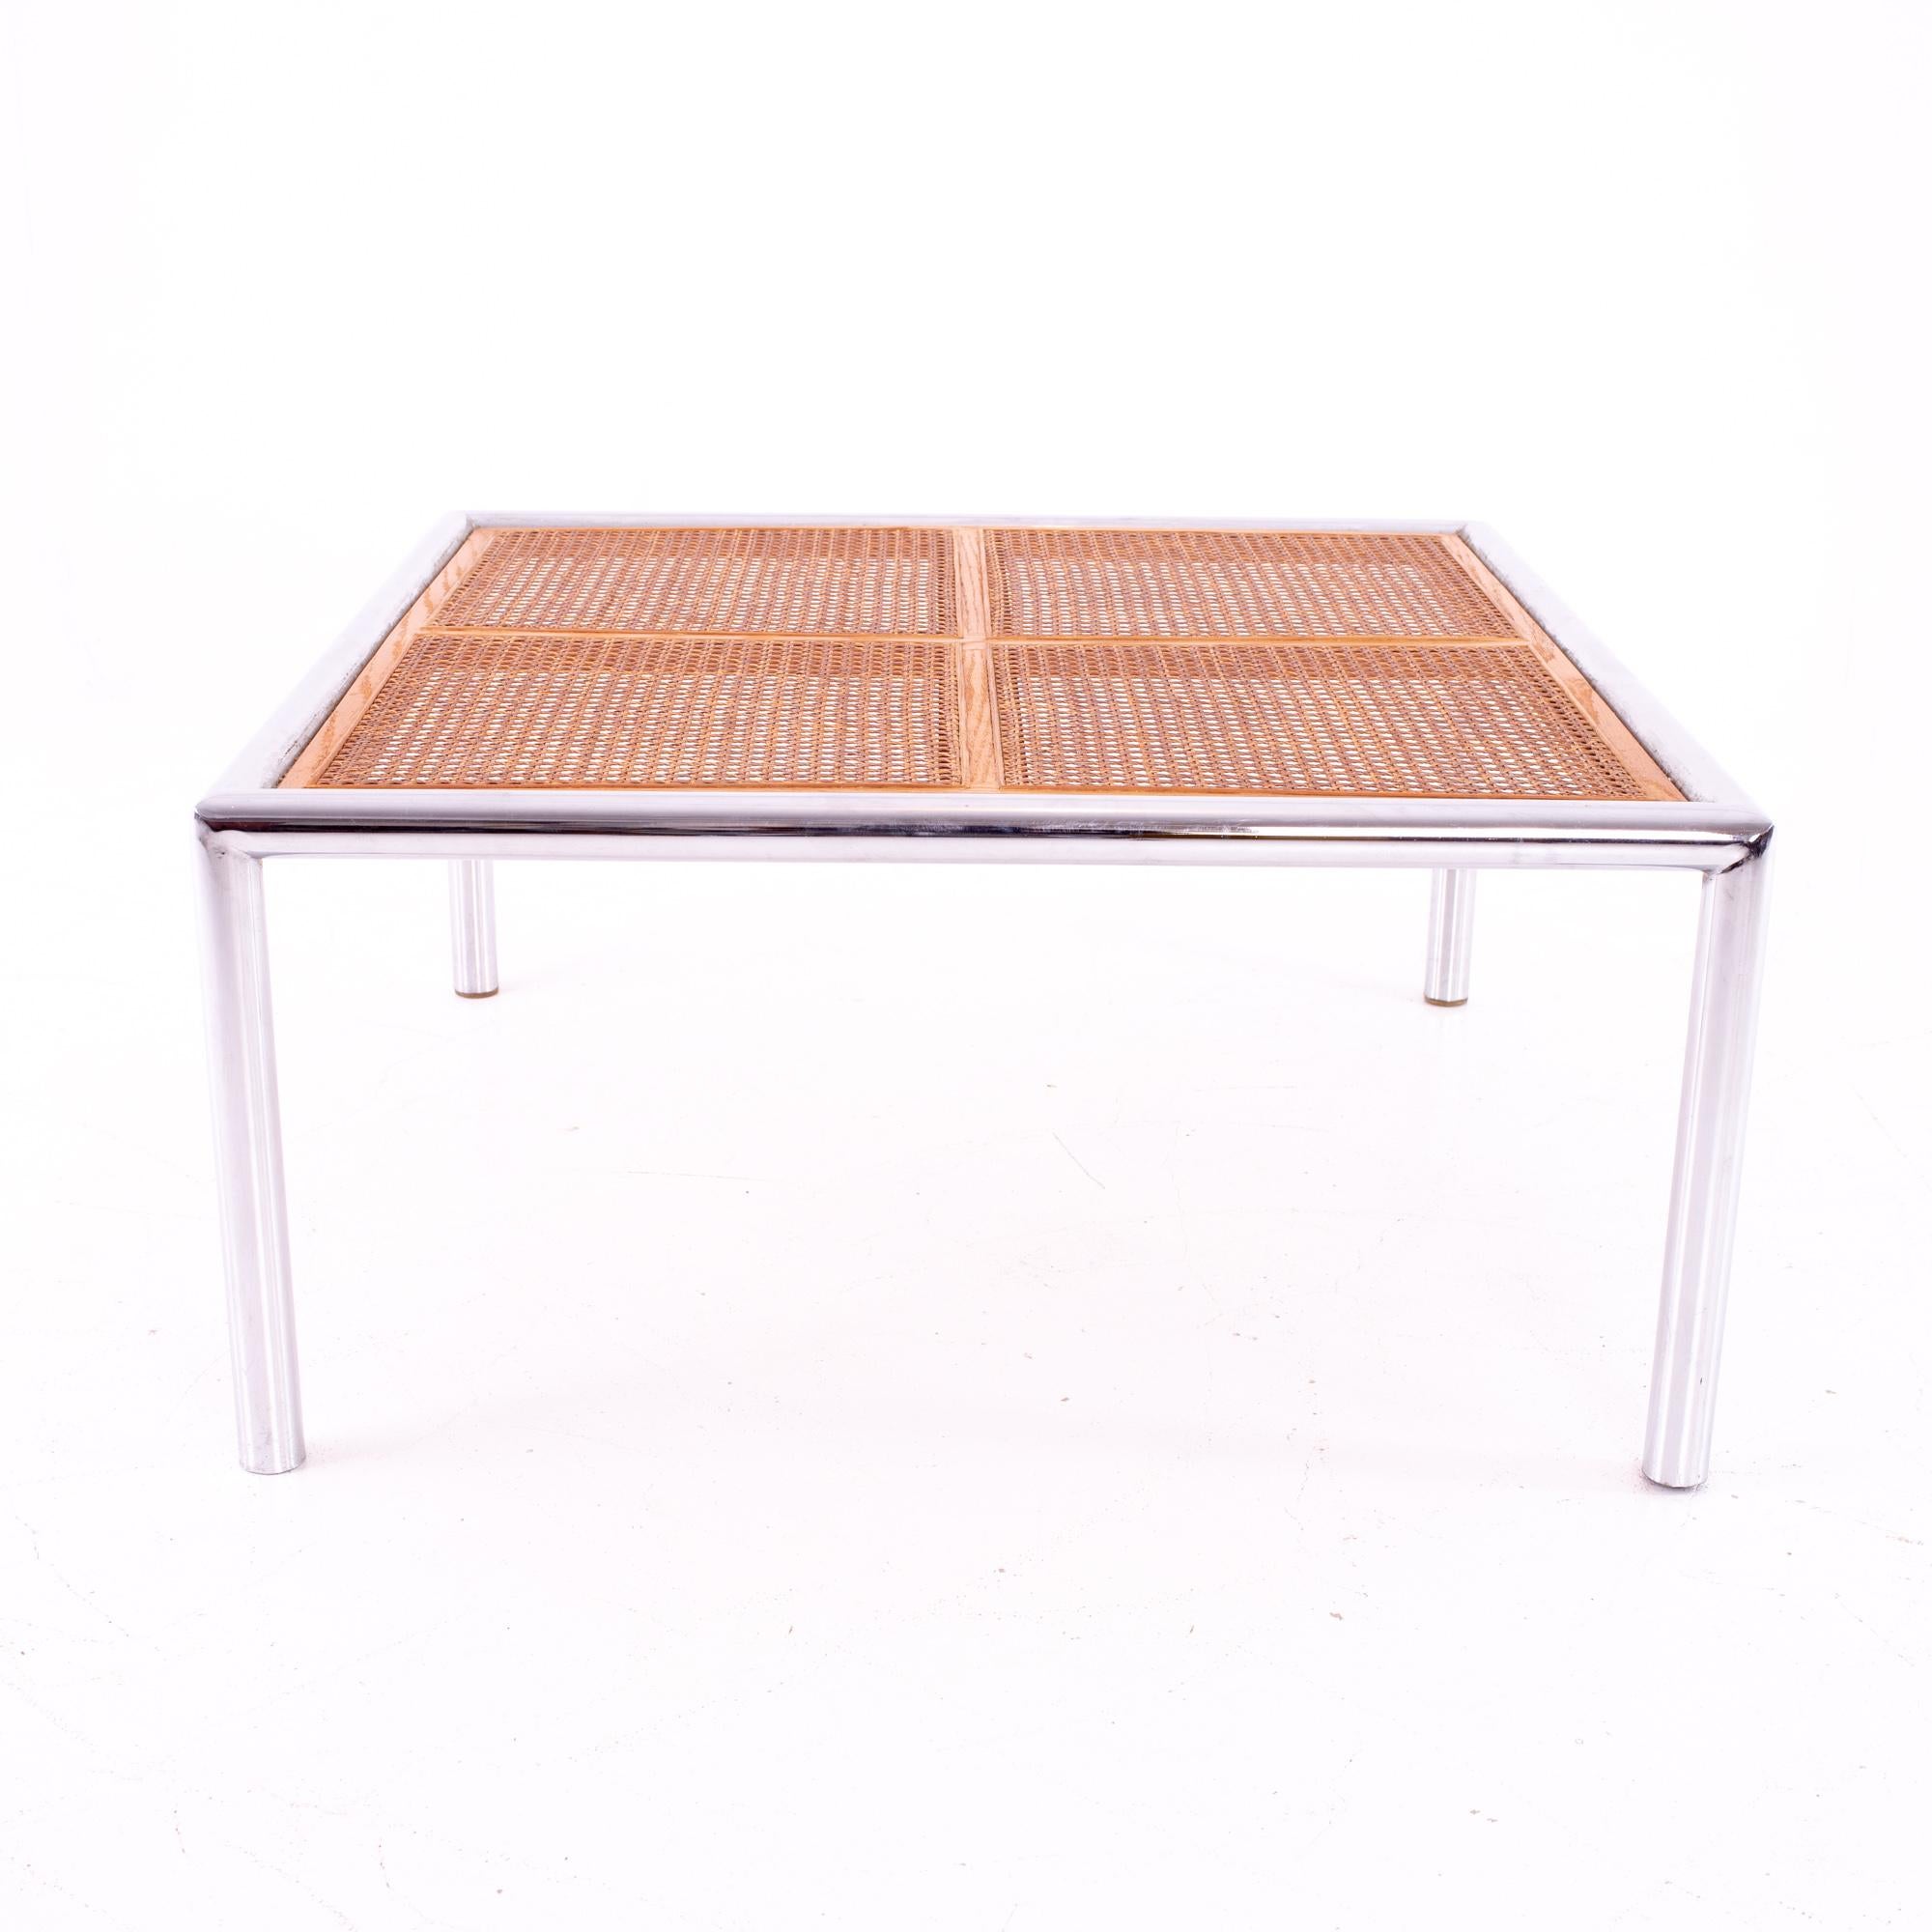 Milo Baughman Style Mid Century cane and chrome glass top coffee table
Coffee table measures: 34 wide x 34 deep x 16.25 high

All pieces of furniture can be had in what we call restored vintage condition. This means the piece is restored upon